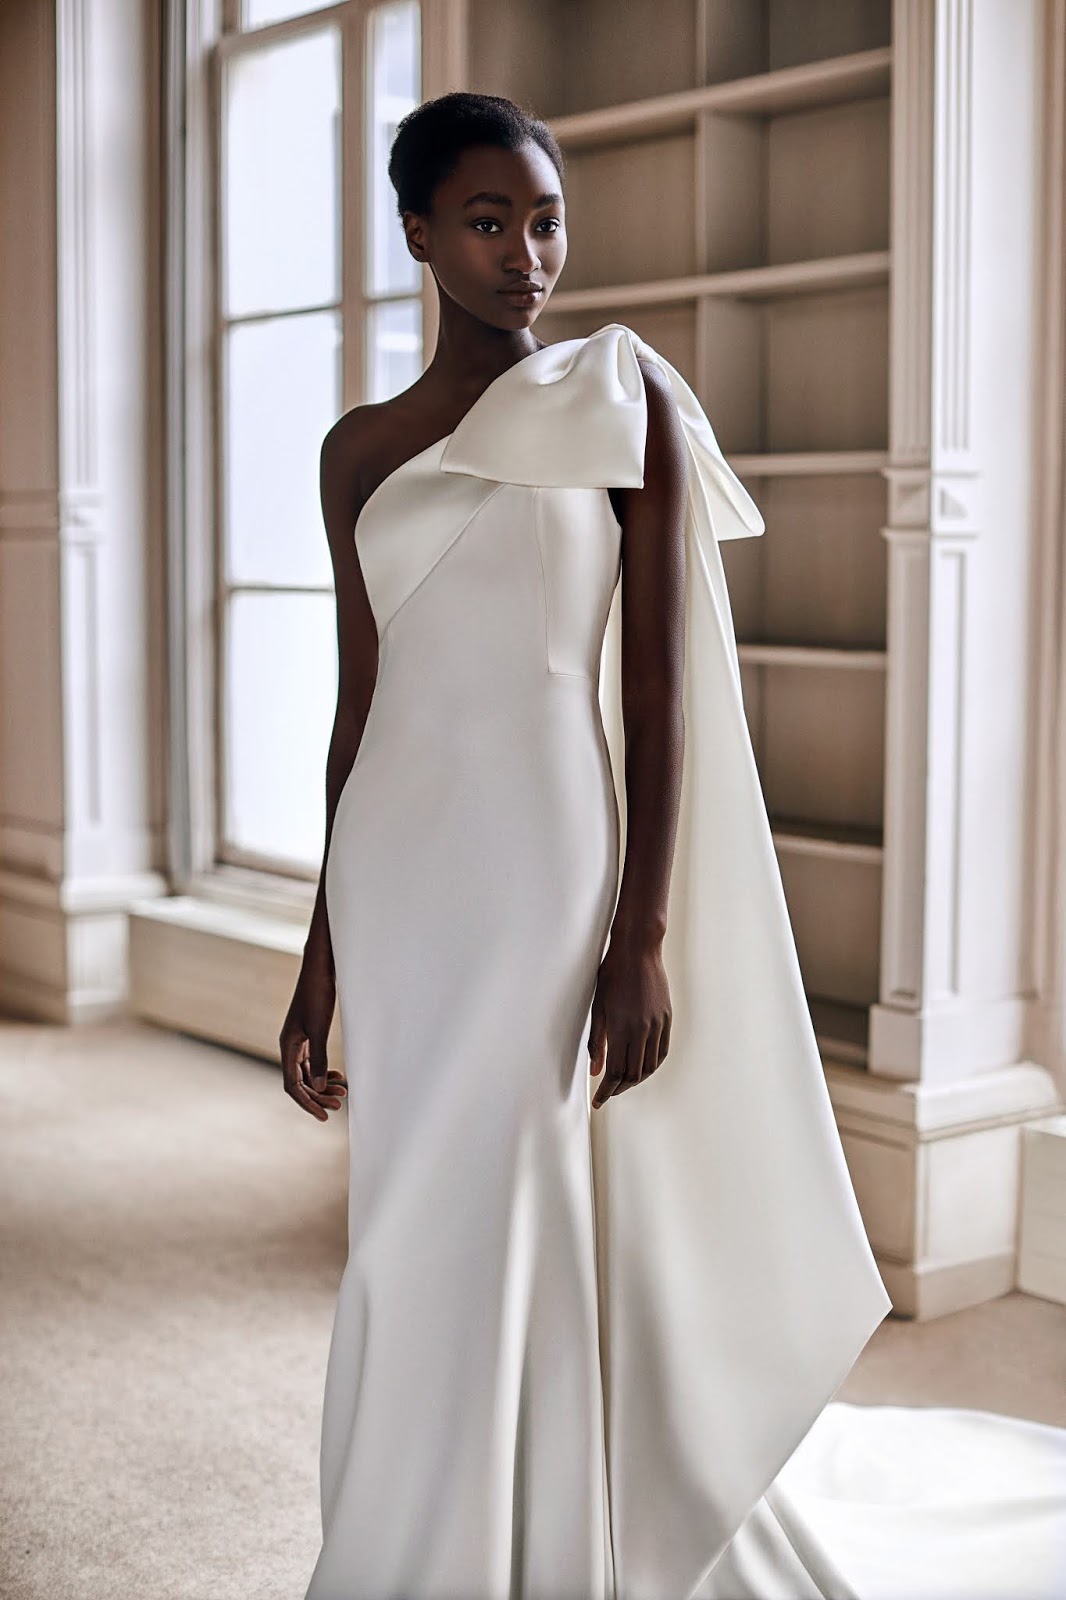 VIKTOR AND ROLF Bridal Collection April 30, 2020 | ZsaZsa Bellagio ...